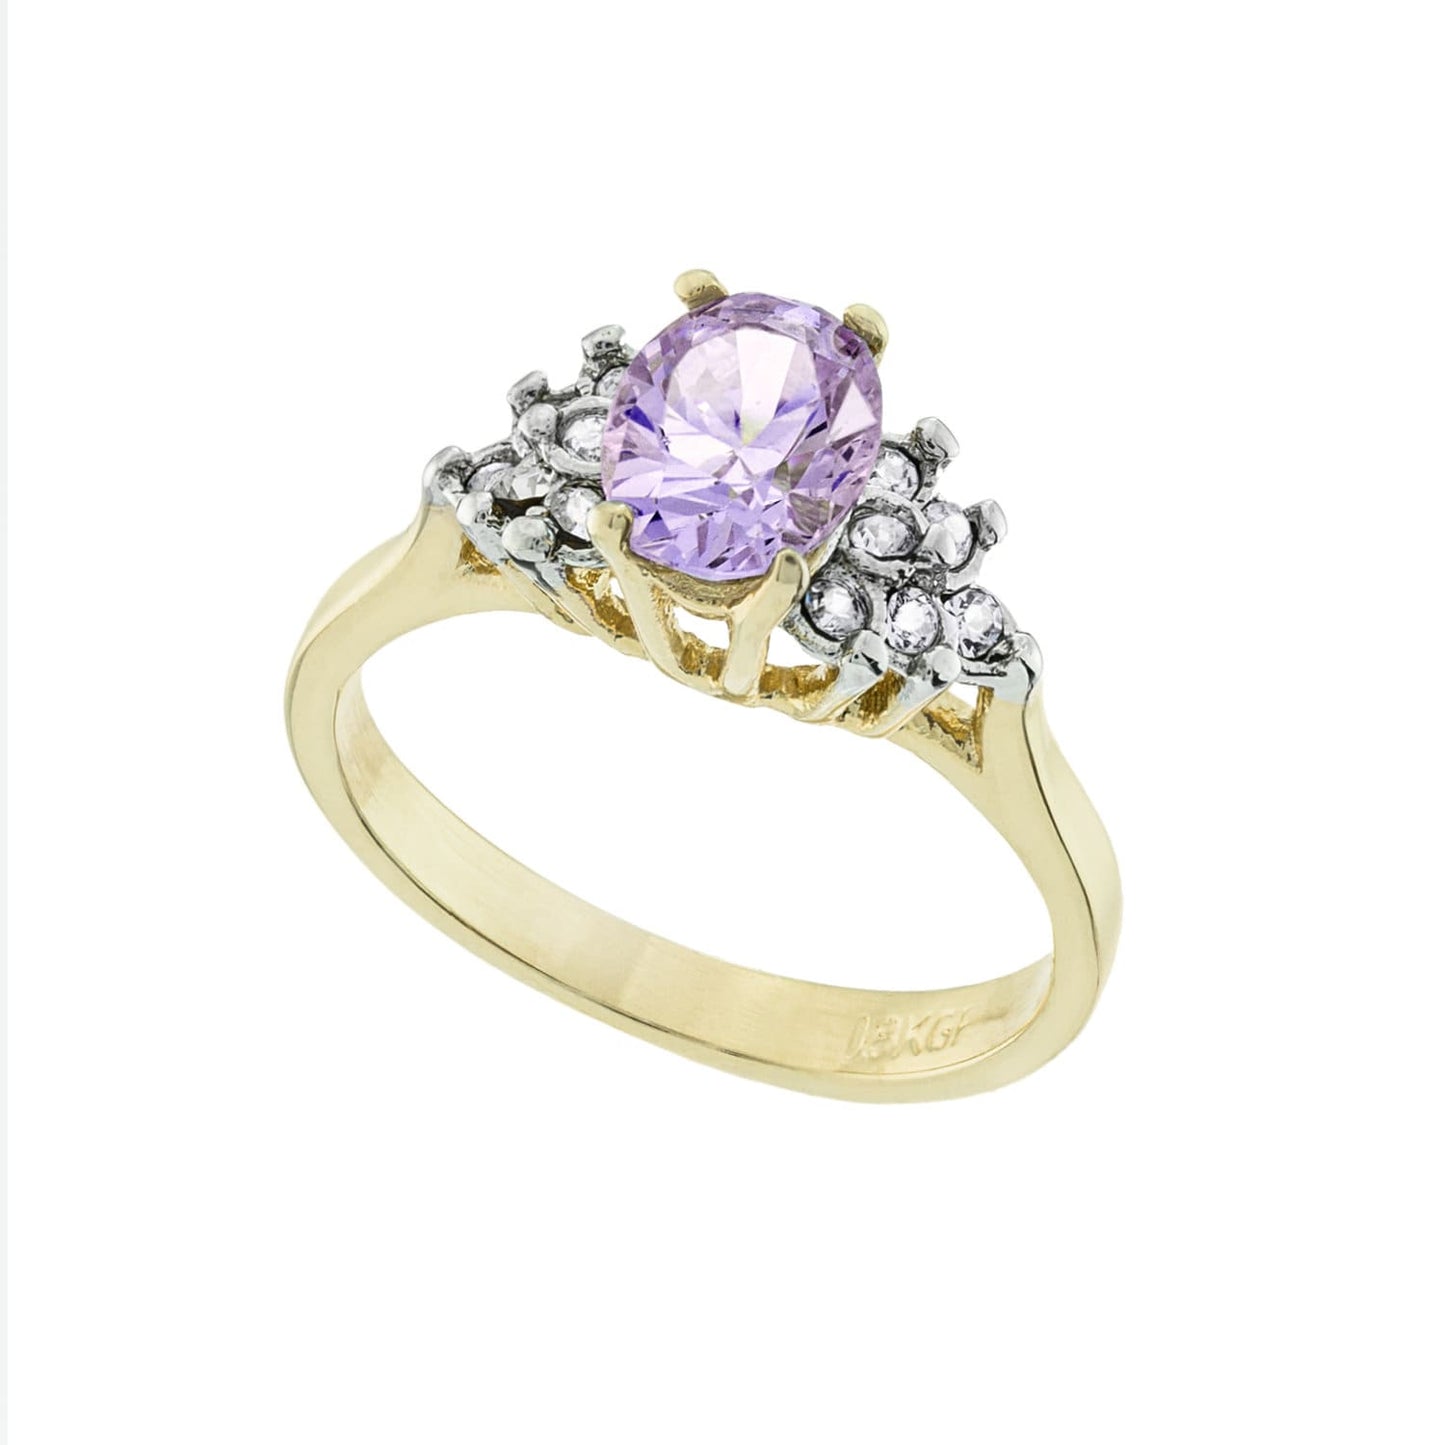 Vintage Ring Lavender Cubic Zirconia and Clear Crystals 18kt Gold  #R1862-LCZY - Limited Stock - Never Worn